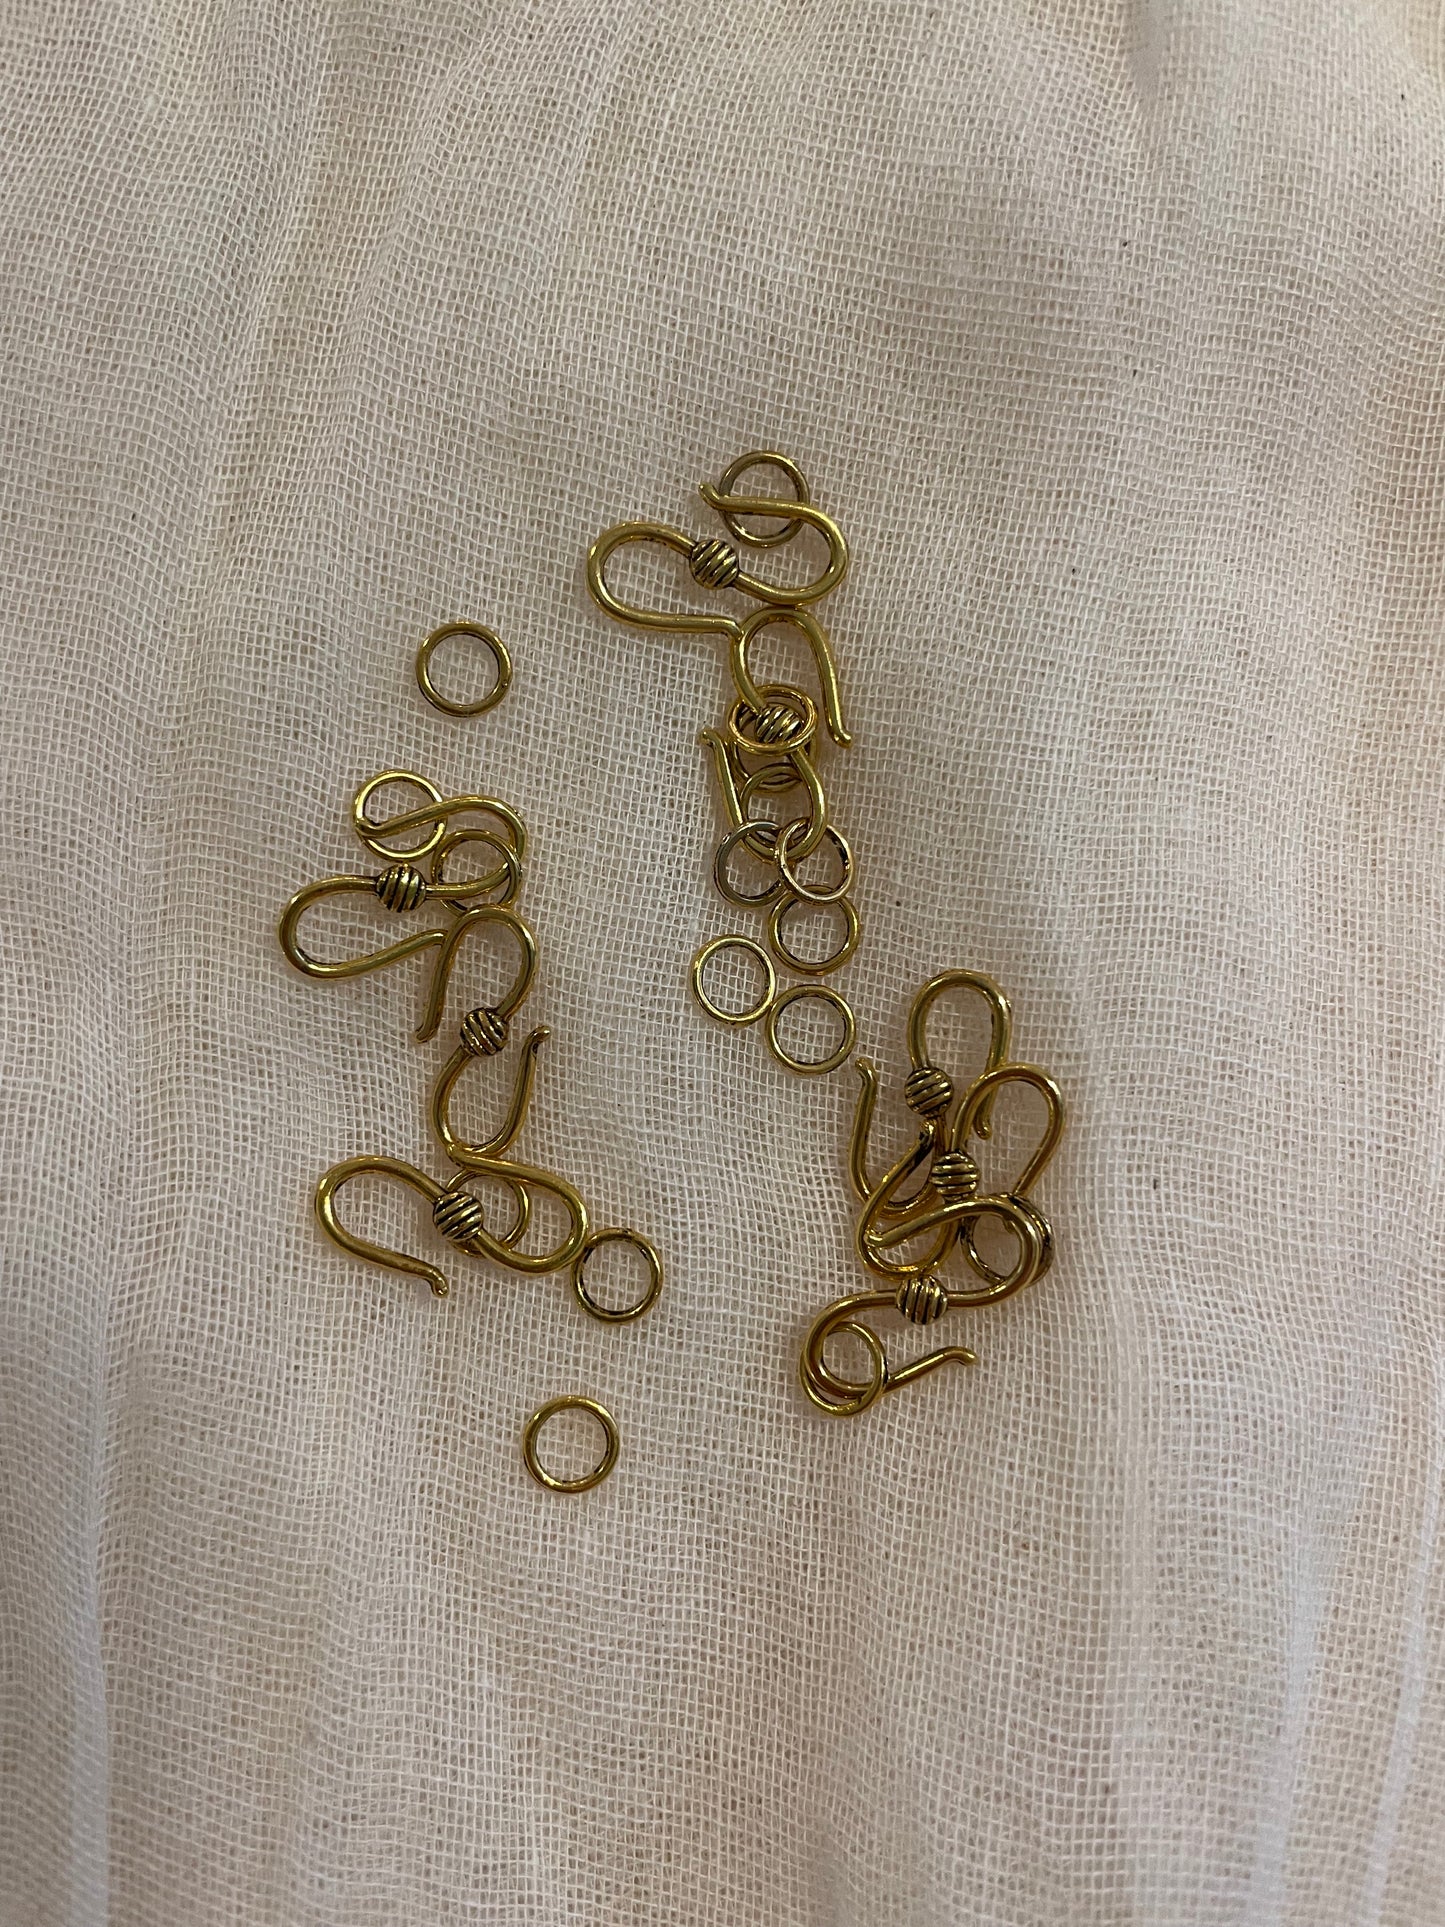 Gold Plated Hook Eye Clasps 20mm 8 Pairs